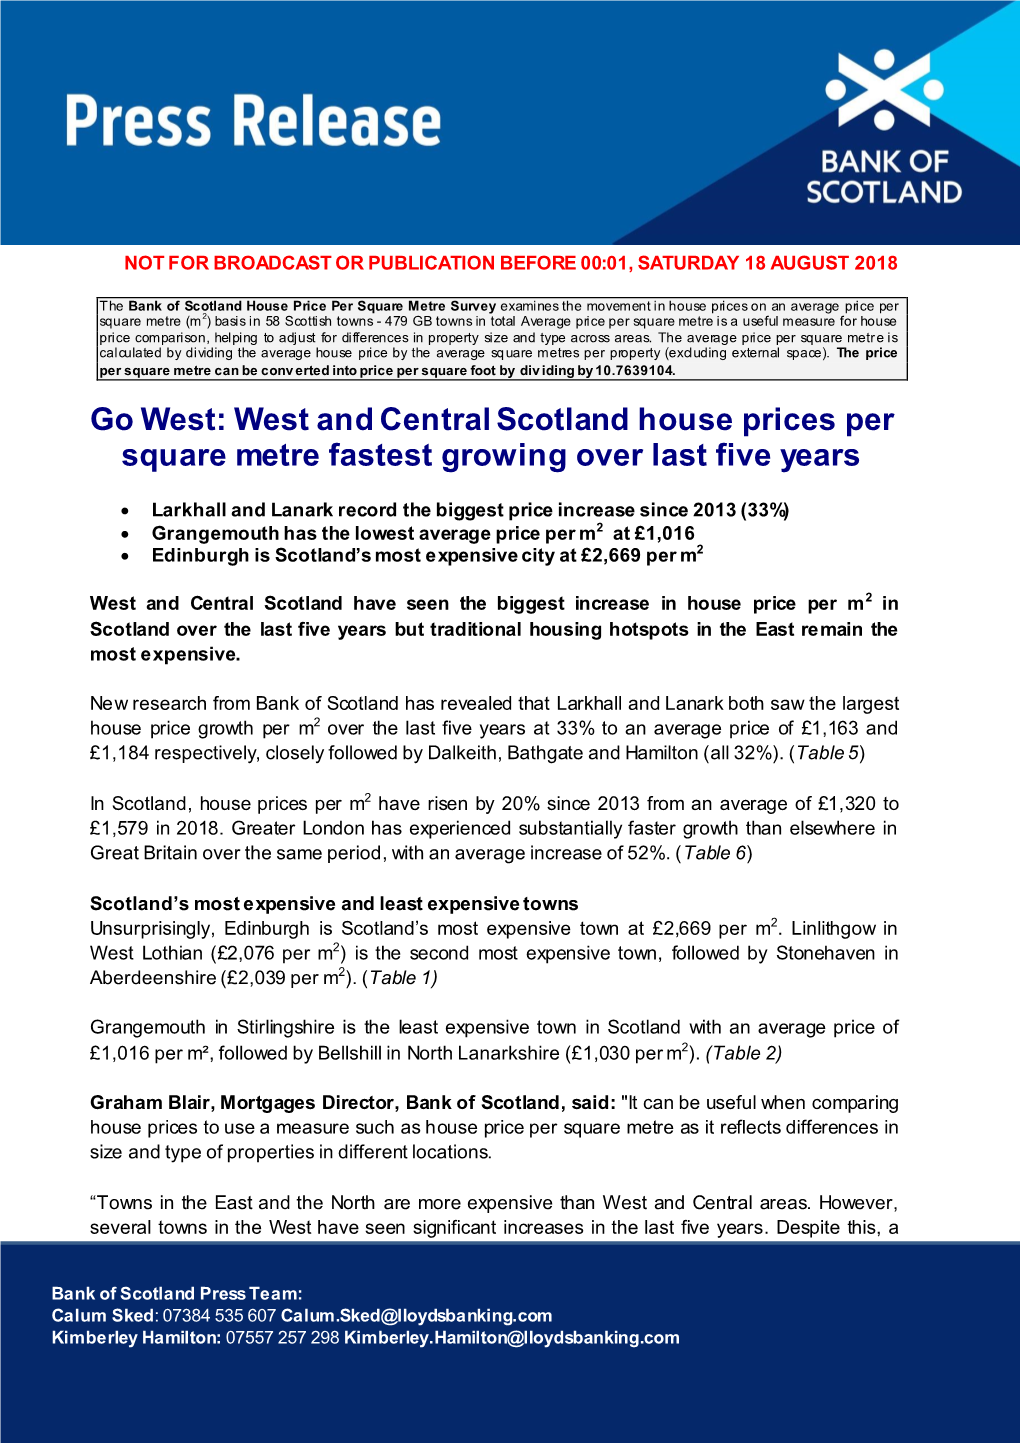 West and Central Scotland House Prices Per Square Metre Fastest Growing Over Last Five Years